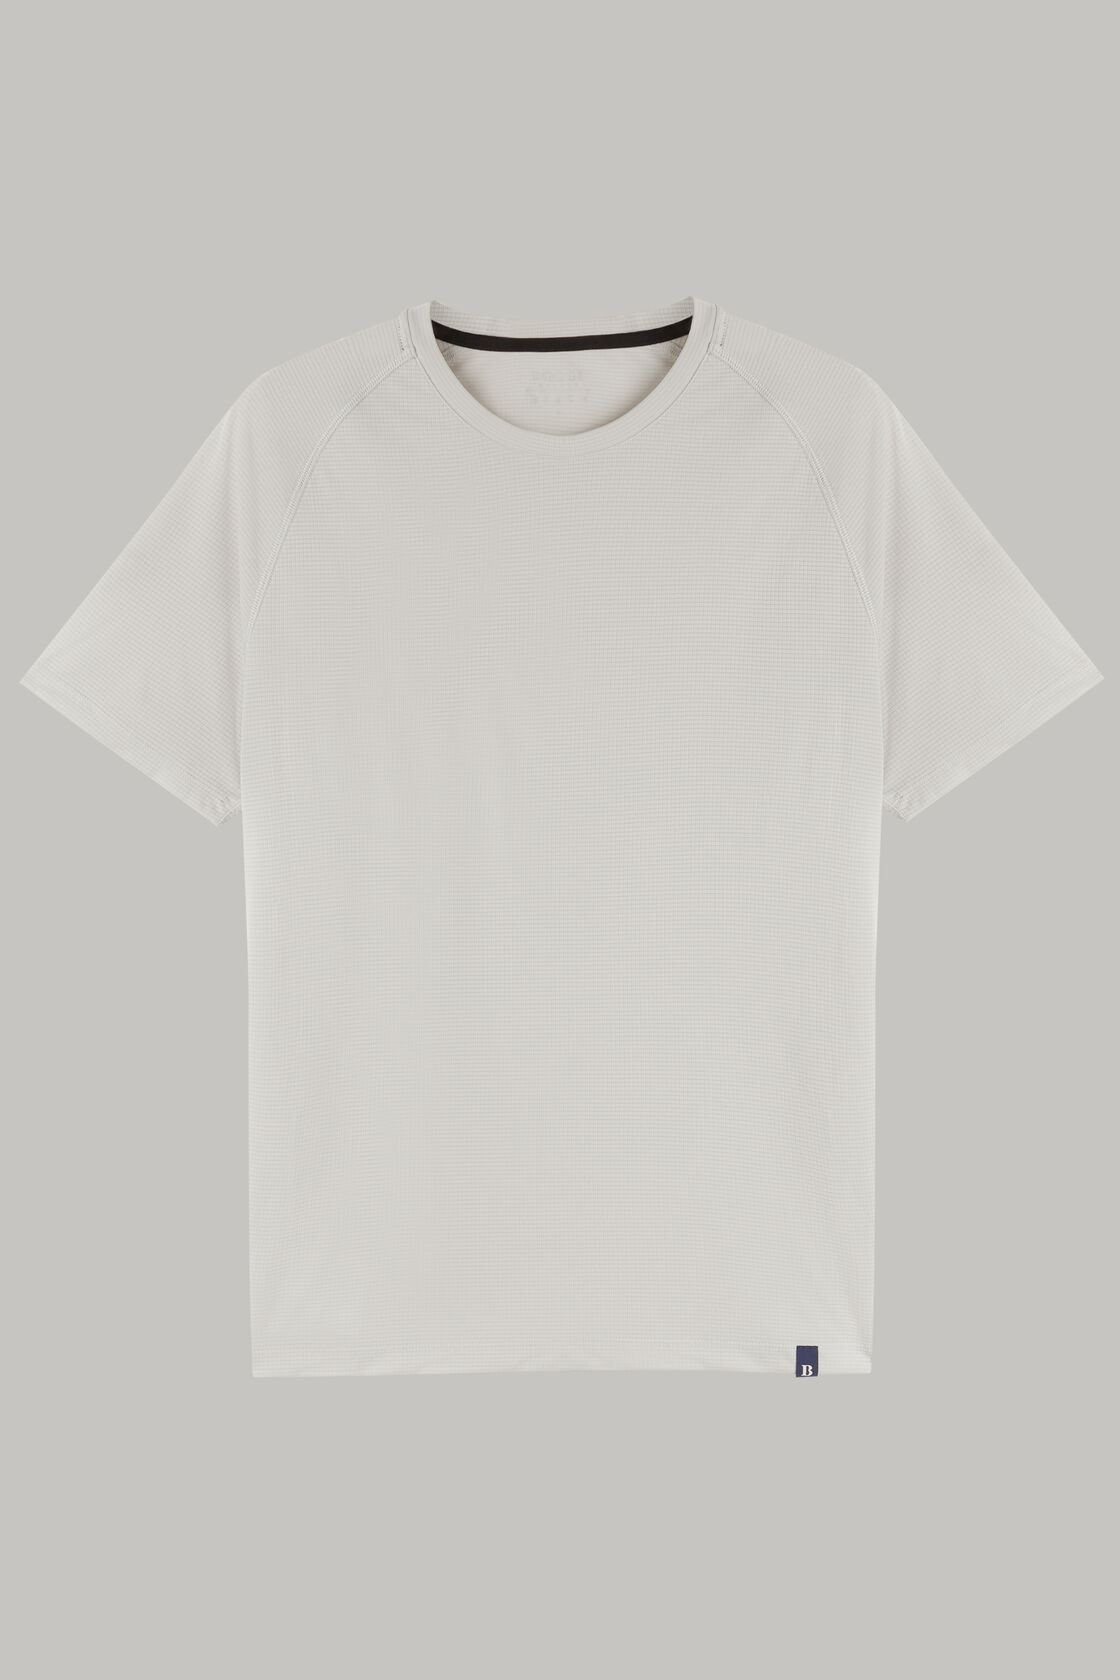 T-shirt in sustainable technical jersey, , hi-res